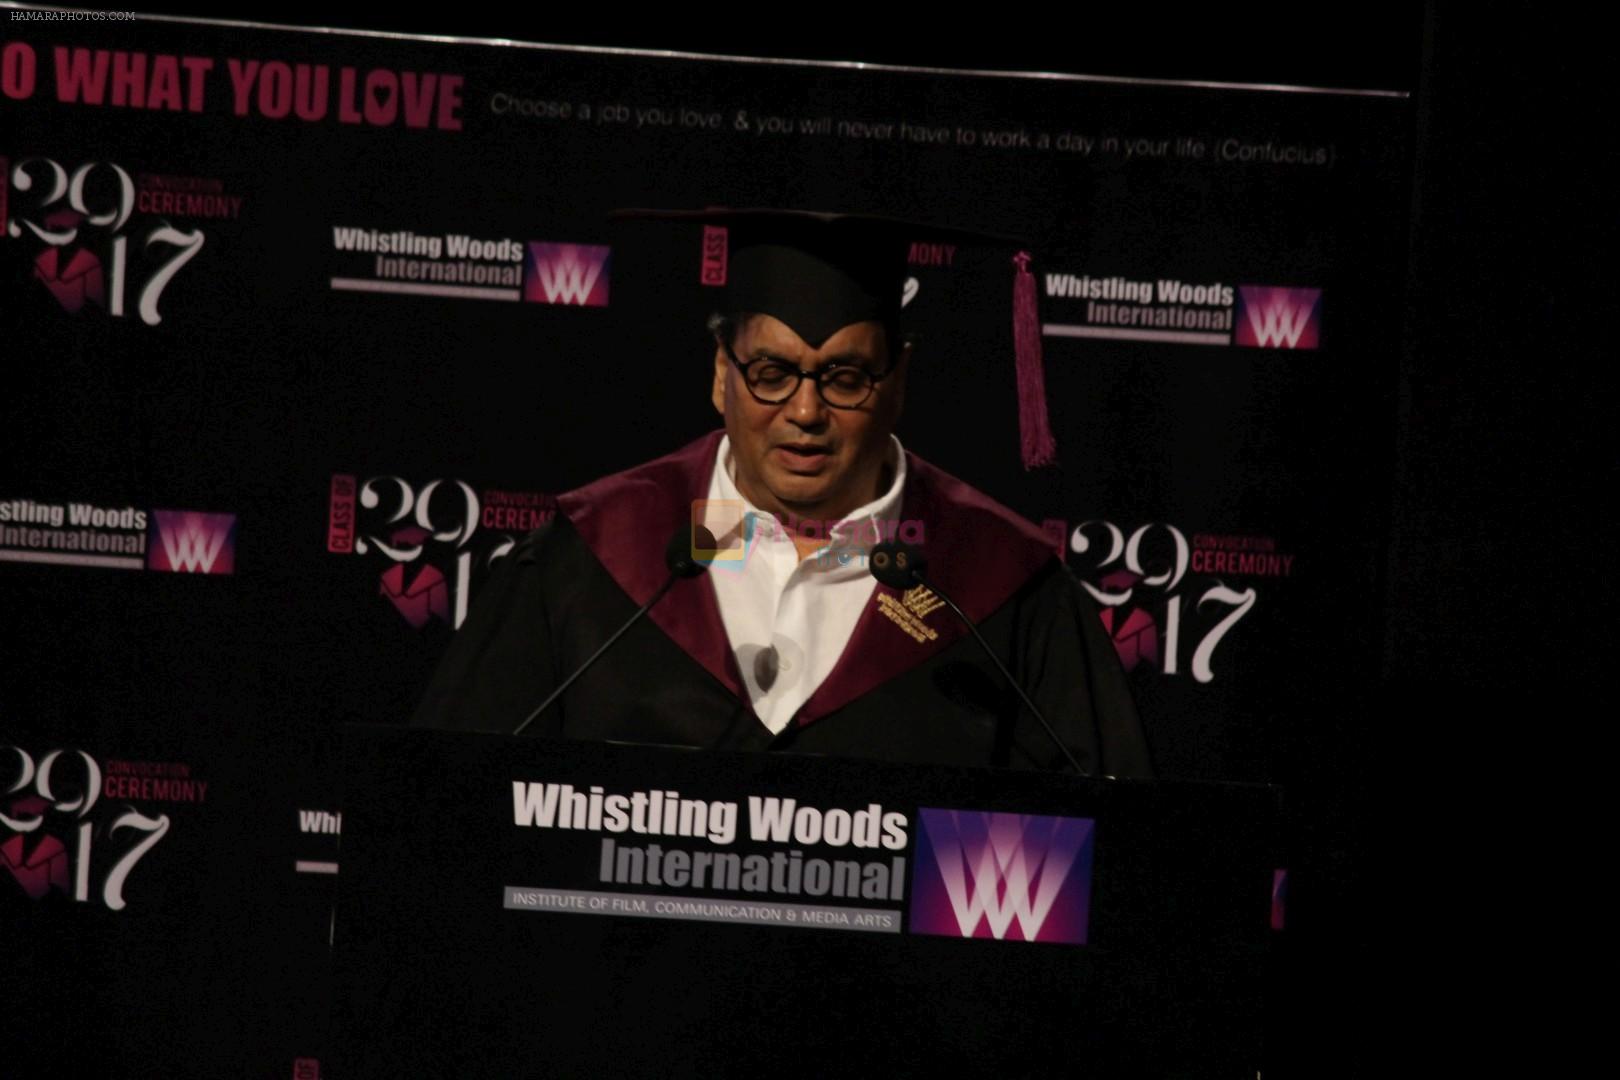 Subhash Ghai at the Celebration Of Whistling Woods International 10th Convocation Ceremony on 18th July 2017